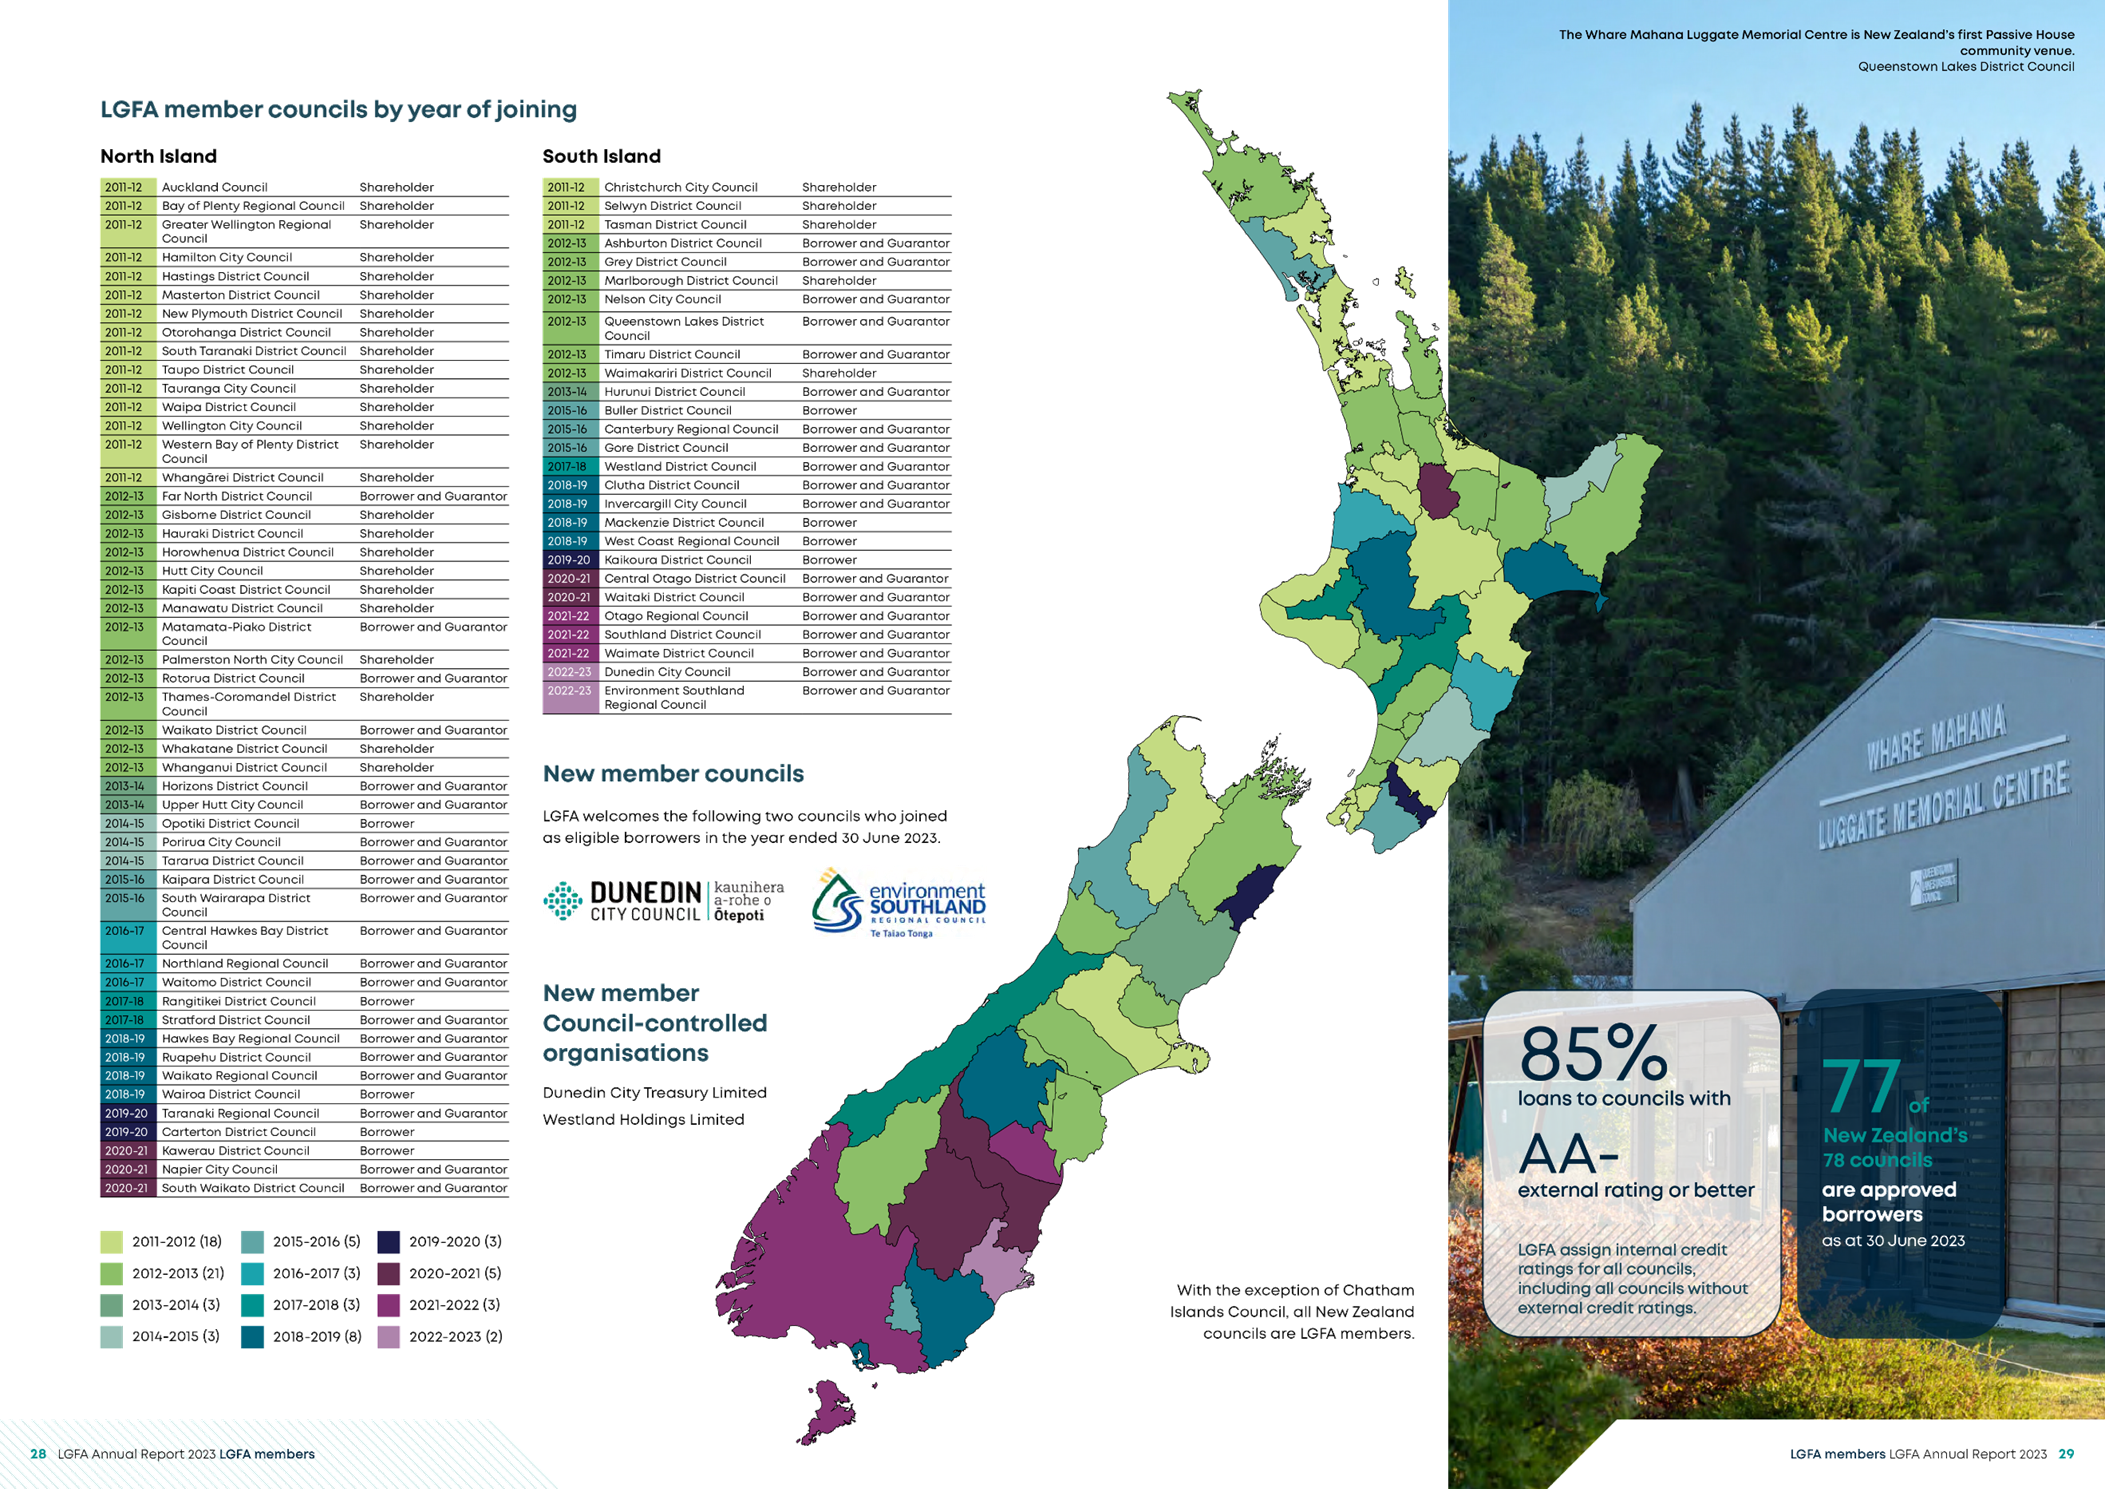 A map of new zealand with a house and trees

Description automatically generated